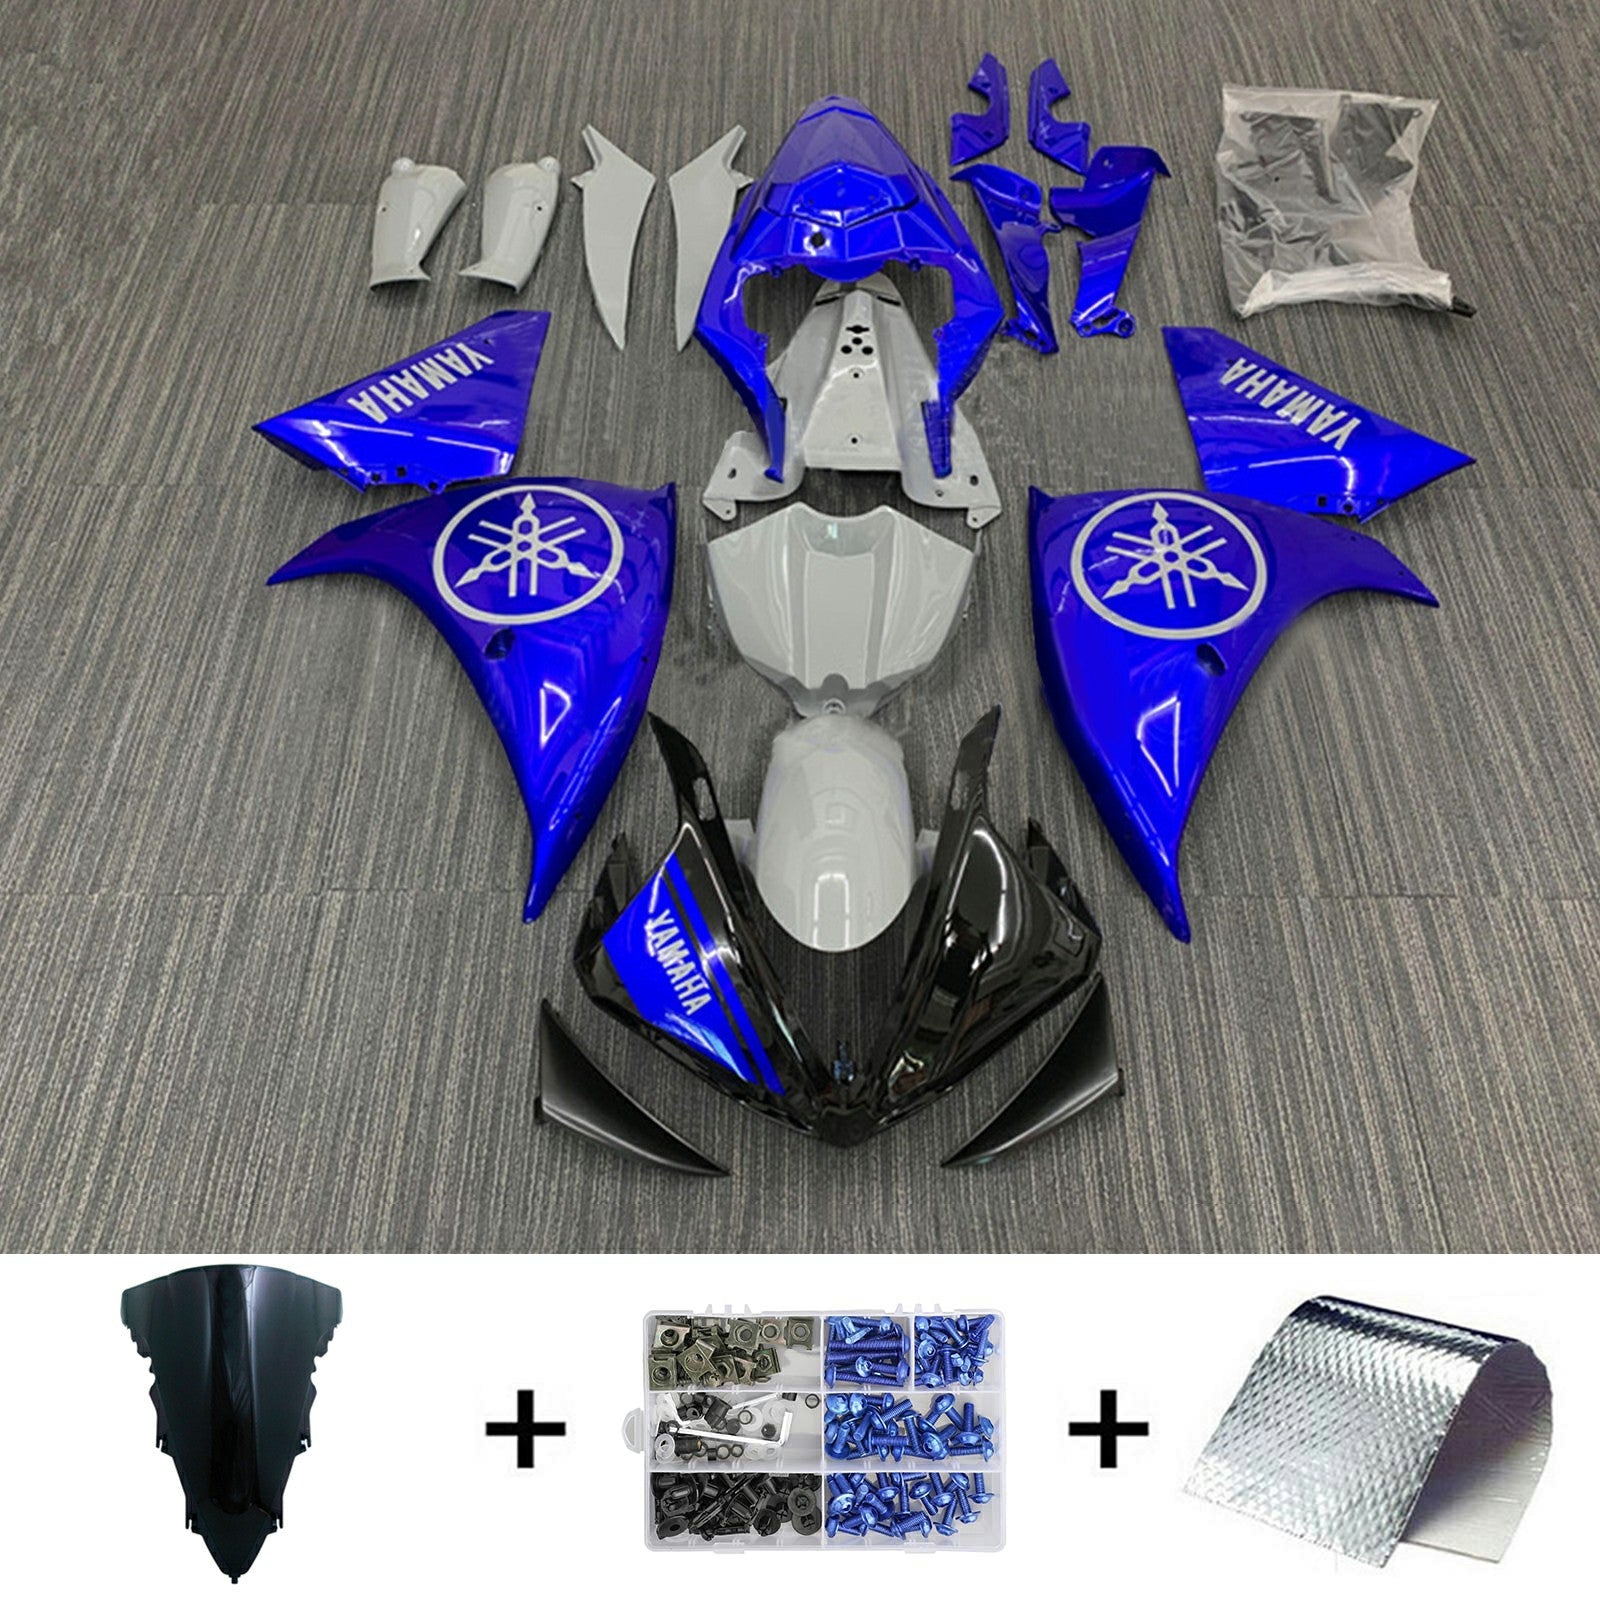 Amotopart Yamaha YZF 1000 R1 2009-2011 Kit carena carrozzeria in plastica ABS